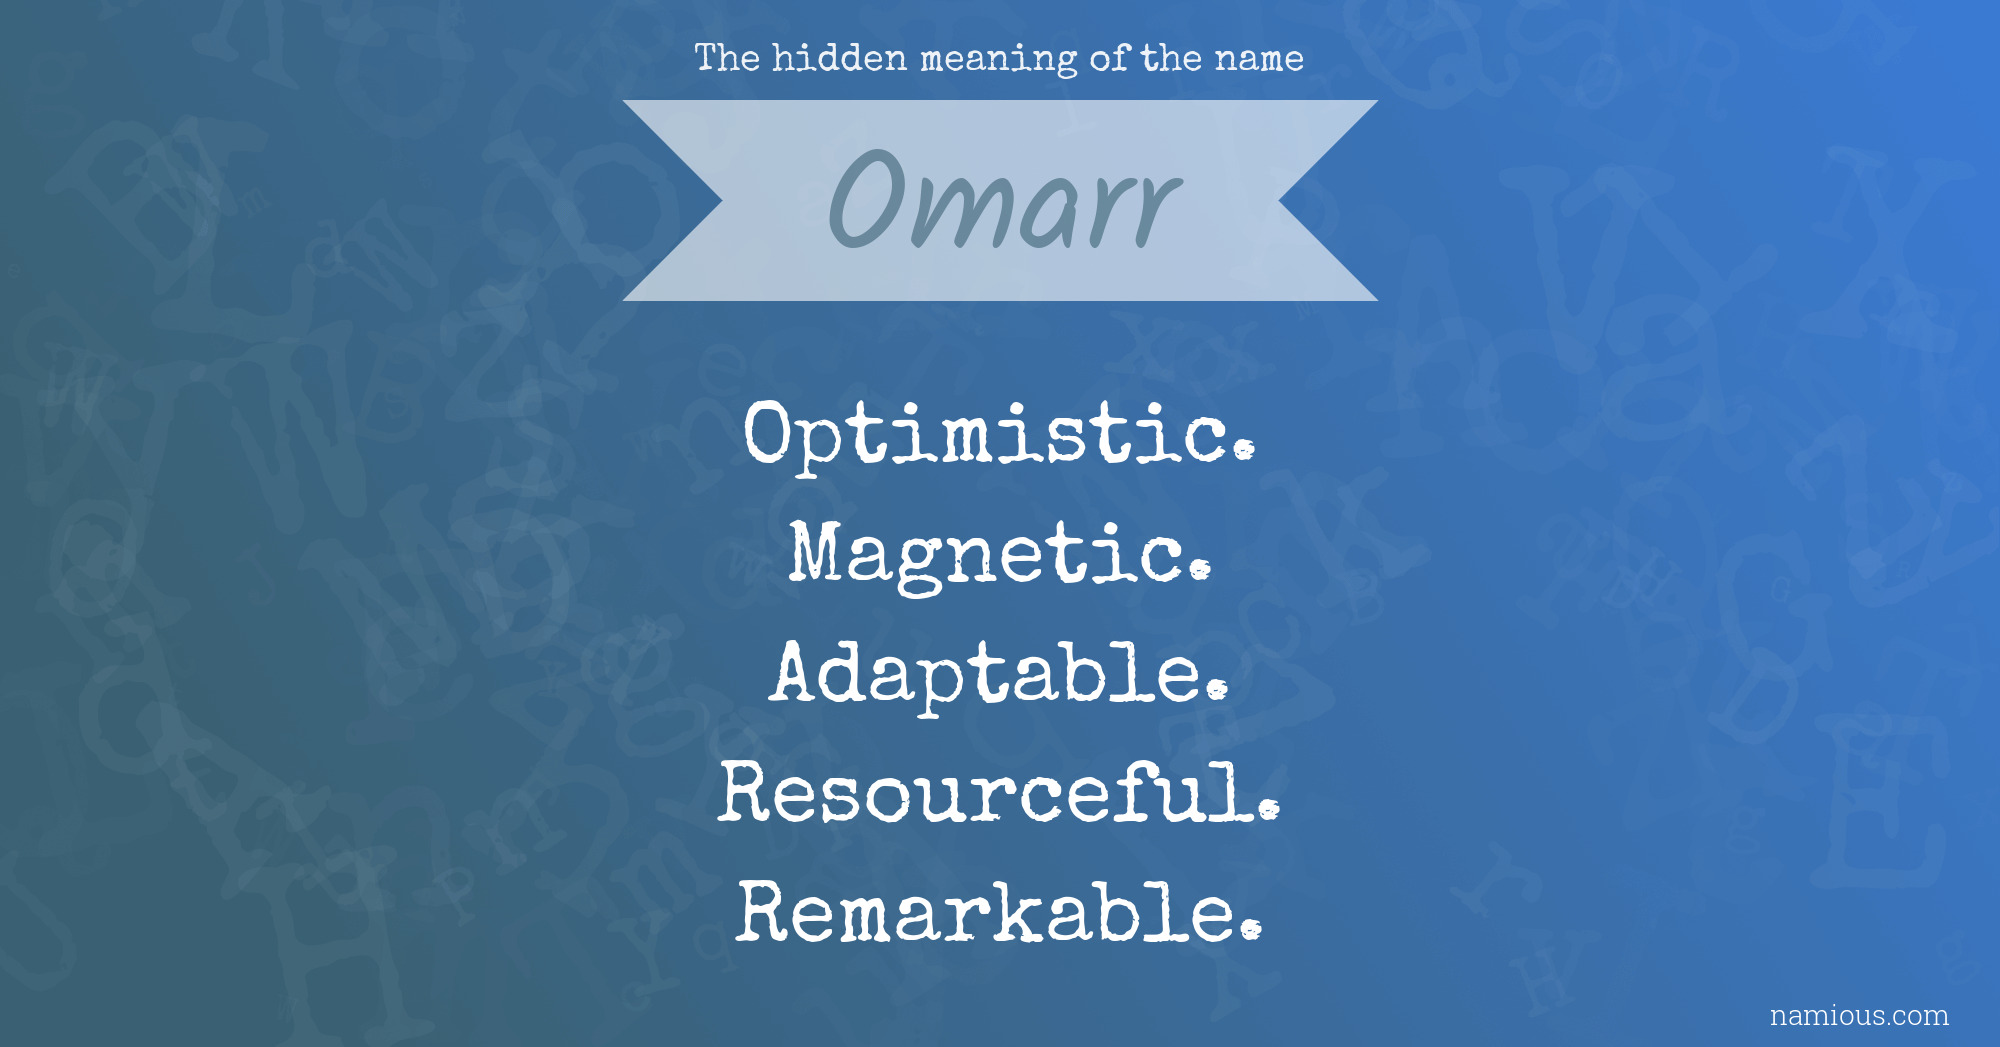 The hidden meaning of the name Omarr